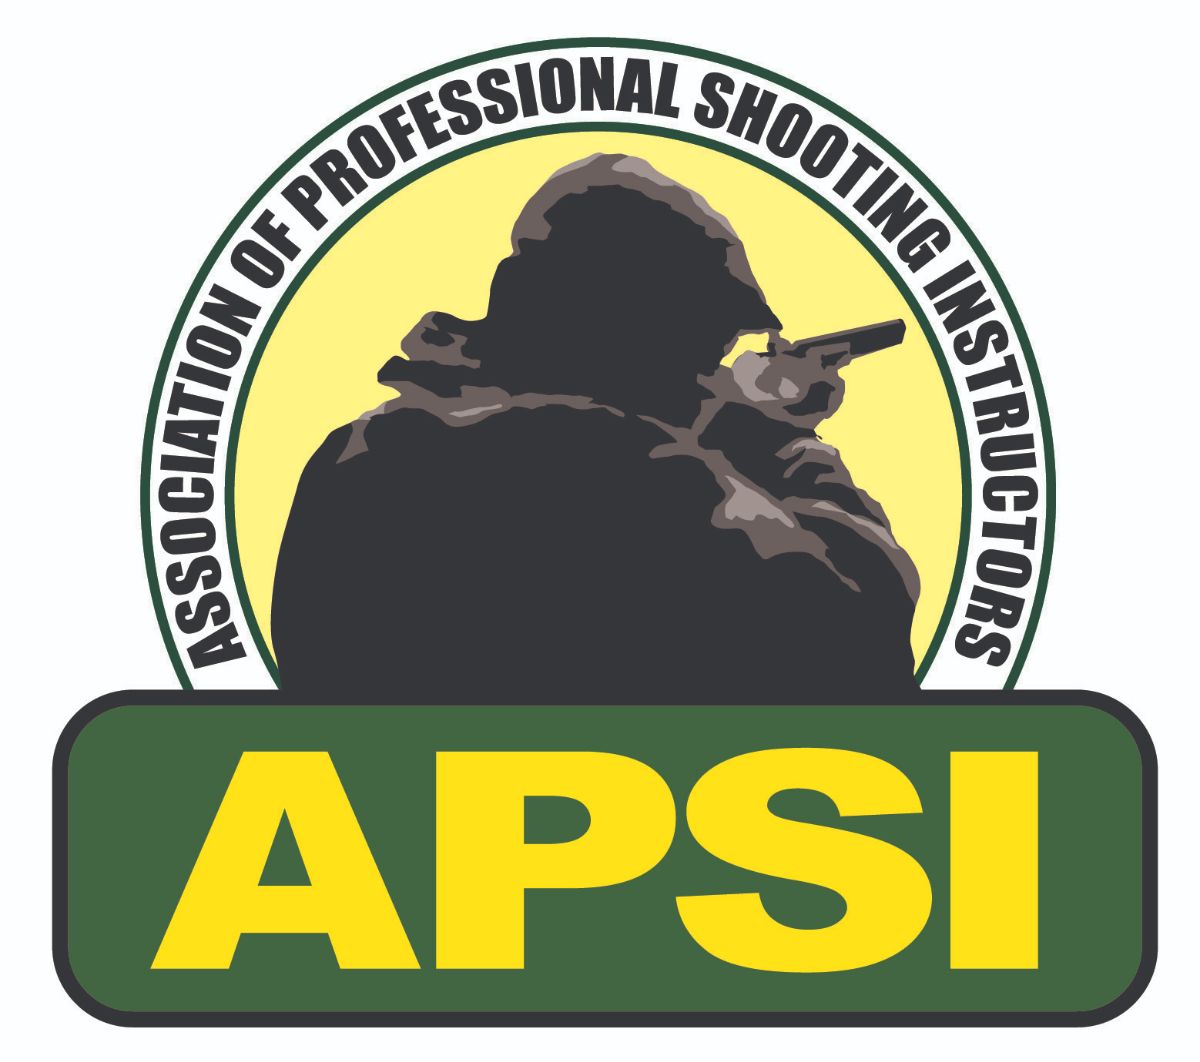 Association or Professional Shooting Instructors